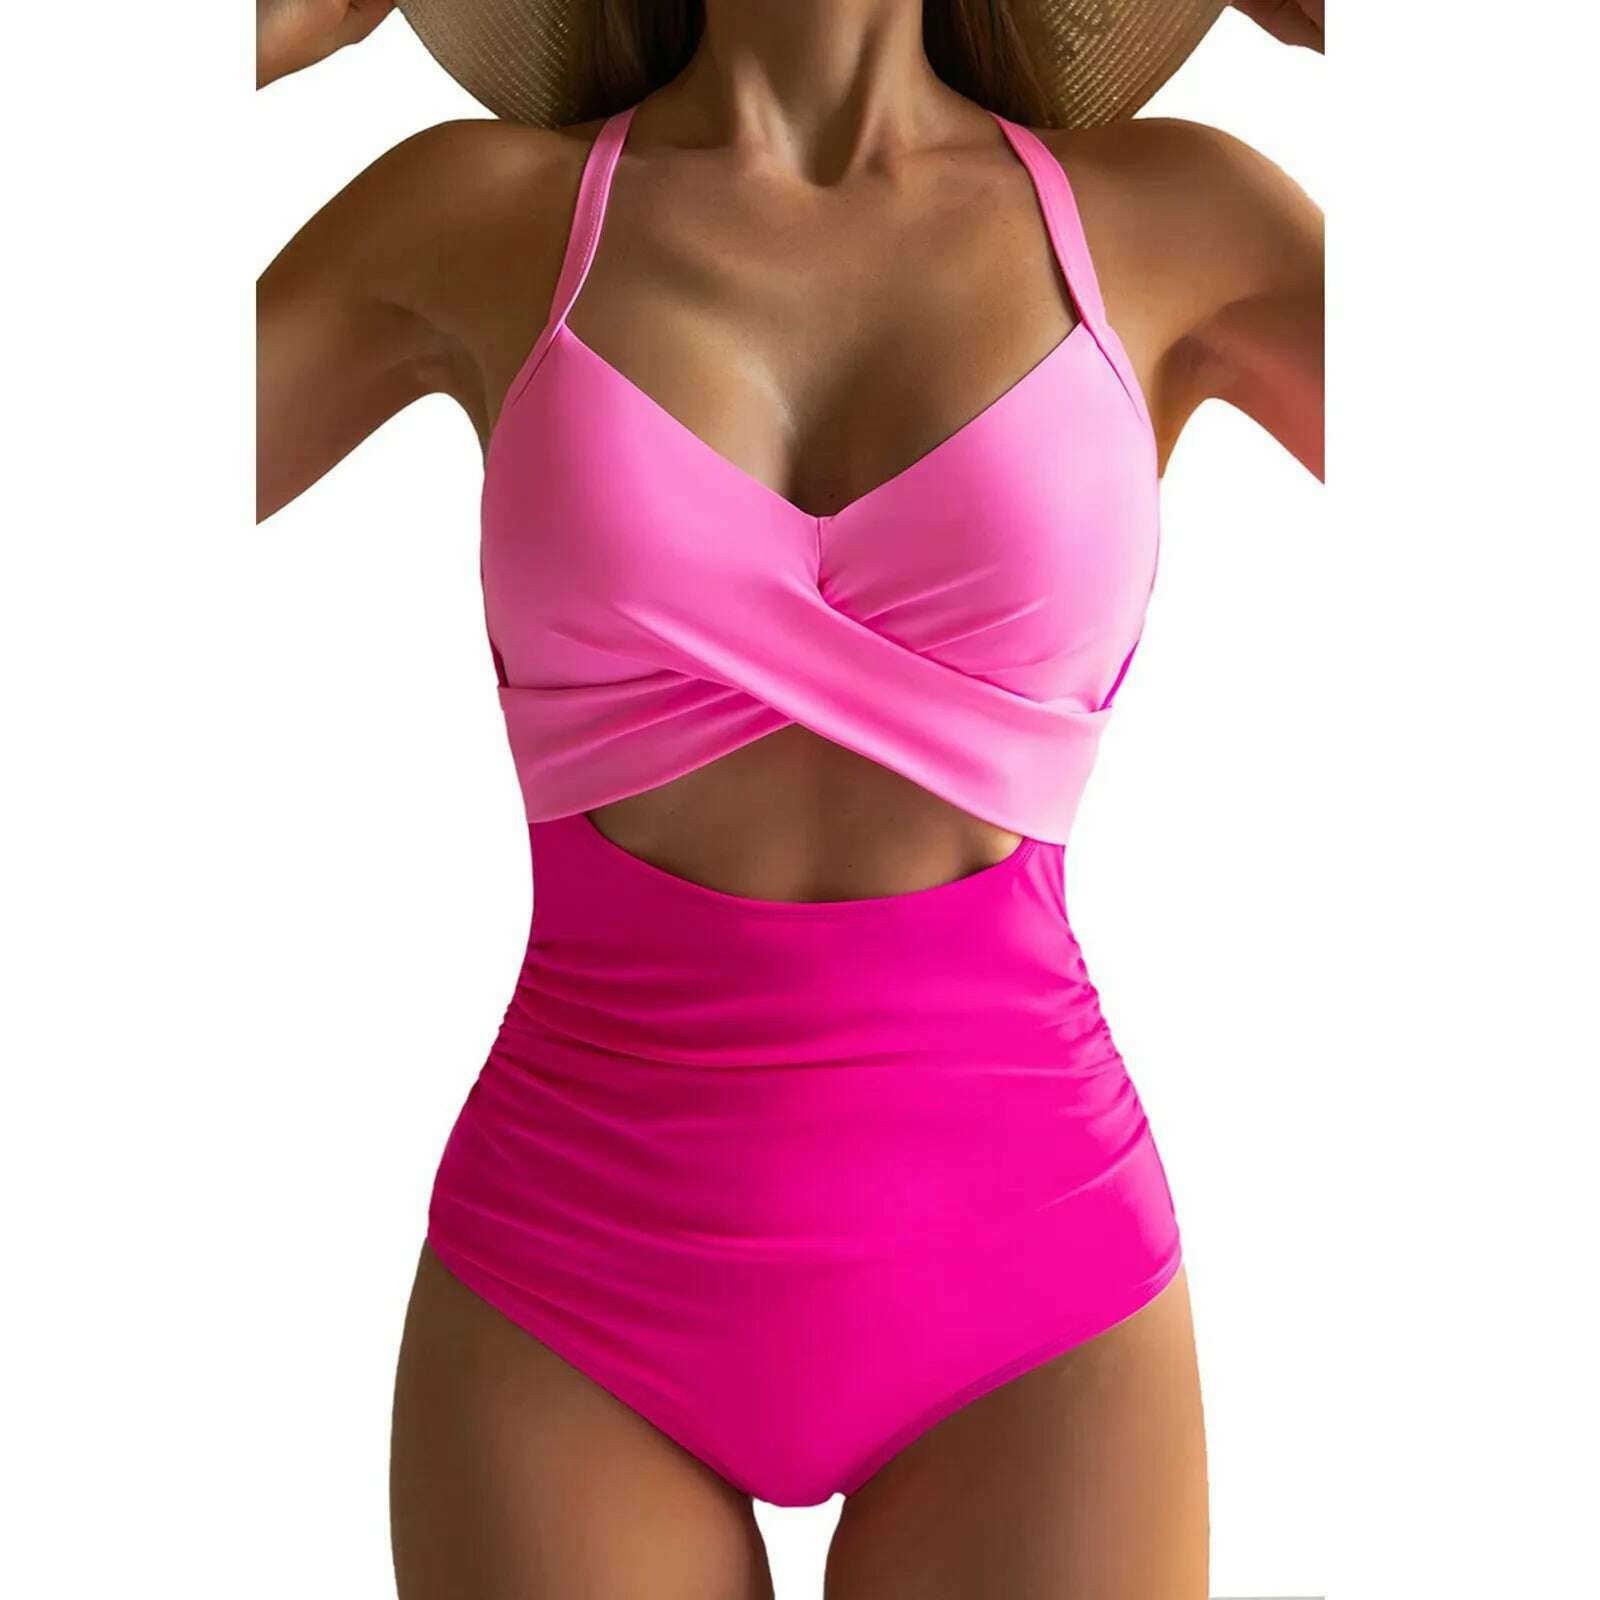 KIMLUD, Women's Colorful Sexy Hollow Cross Halter Bikini Beach Swimsuit (With Chest Pad Without Steel Bra), Hot Pink / S, KIMLUD Womens Clothes